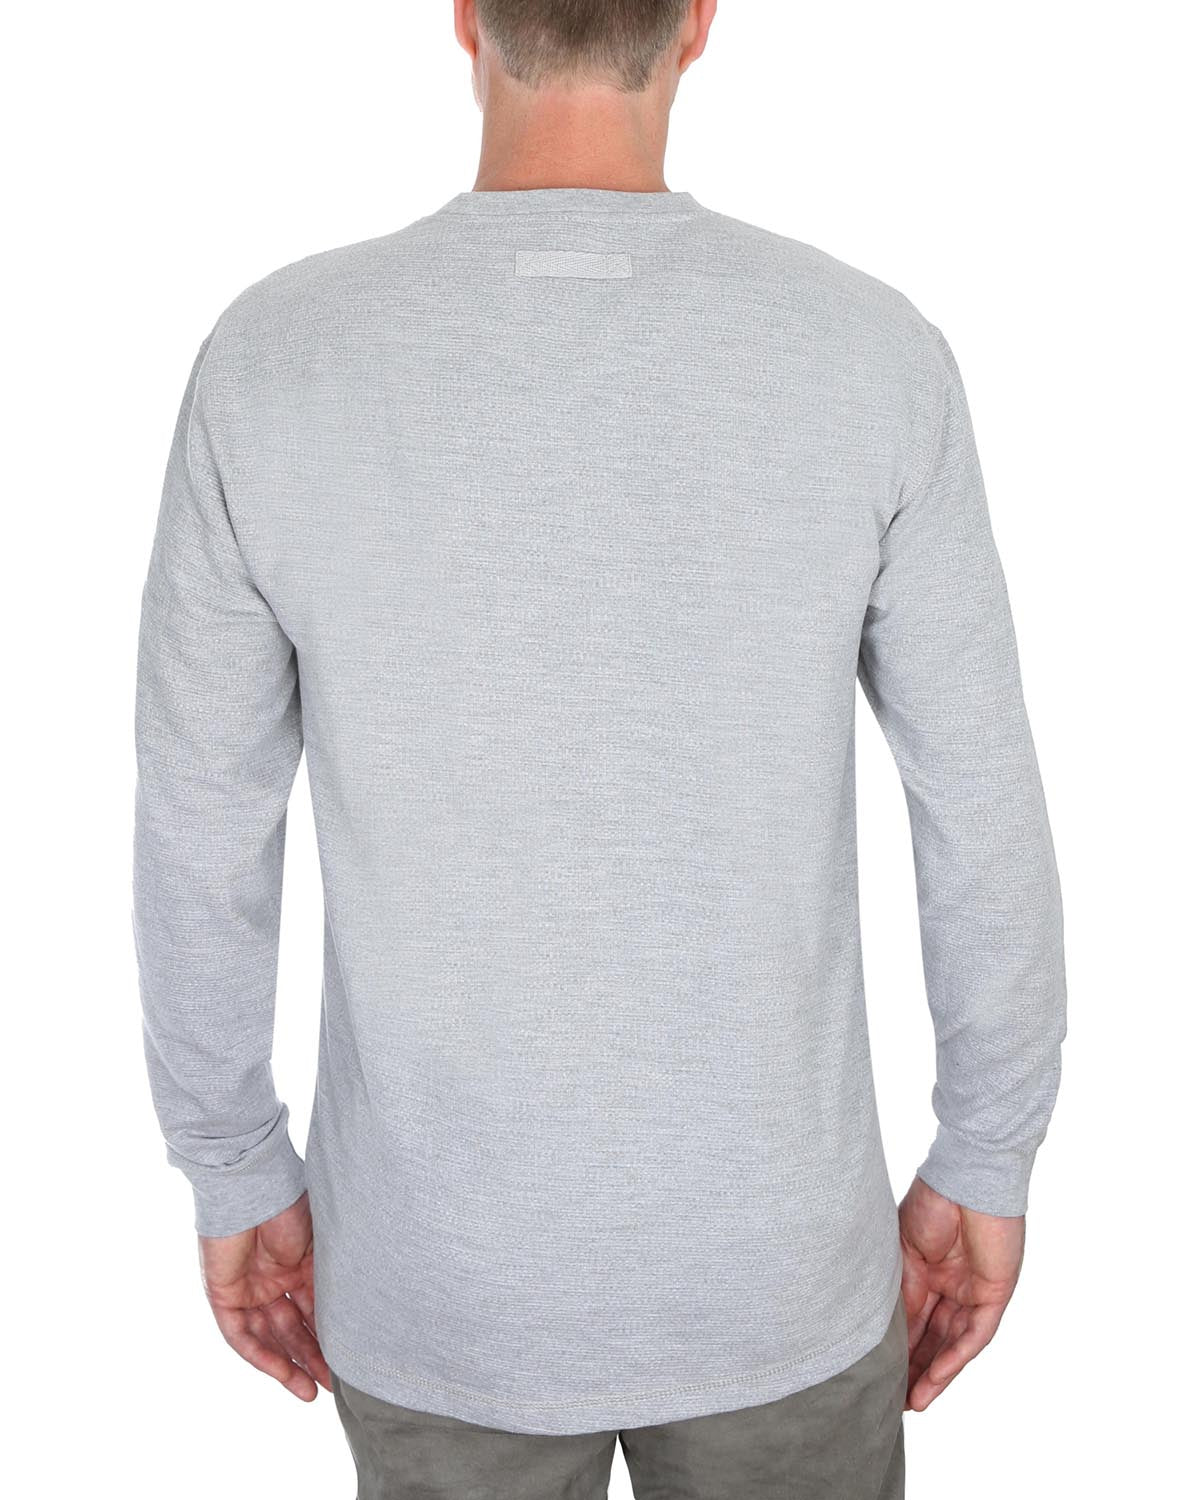 LAYER UP LONG SLEEVE HENLEY WAFFLE IN LIGHT GREY